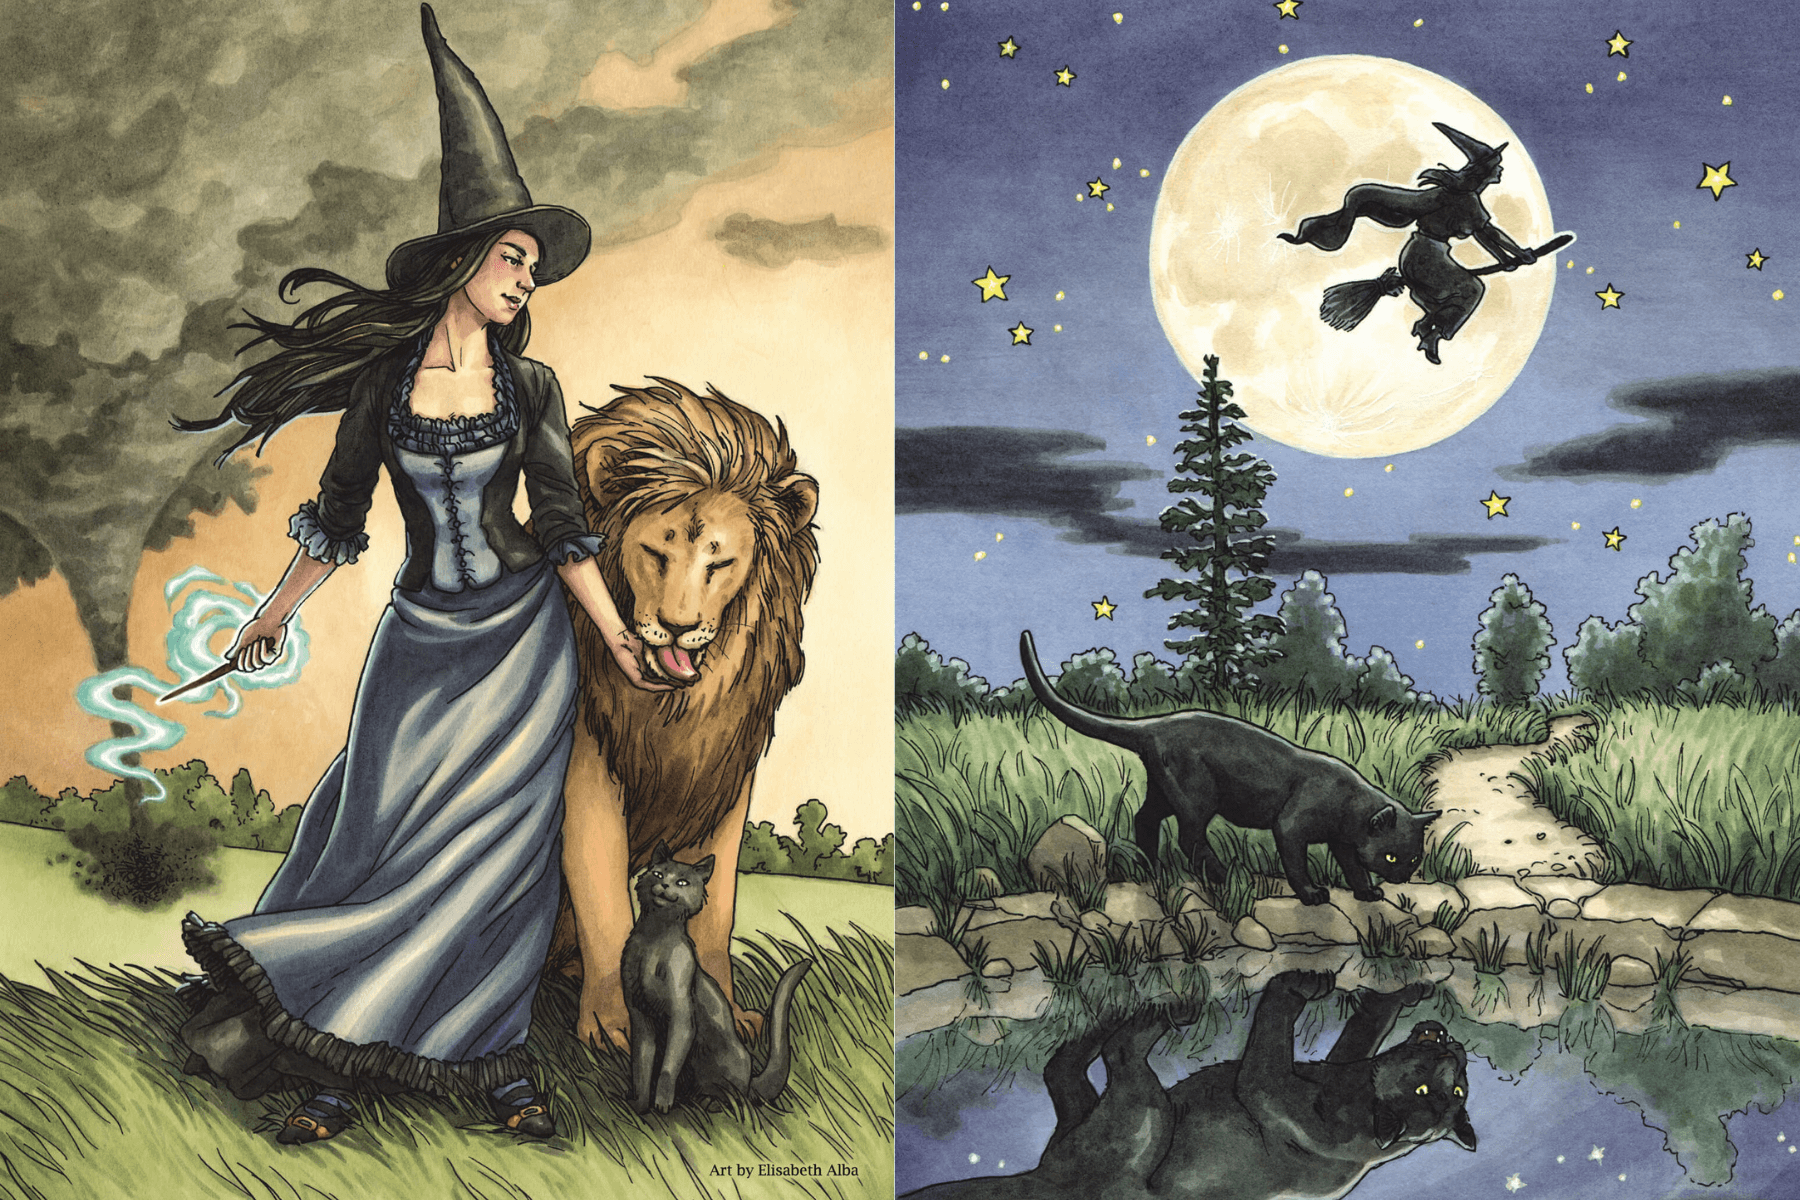 Interview with Elisabeth Alba - Illustrator of the Everyday Witch Tarot